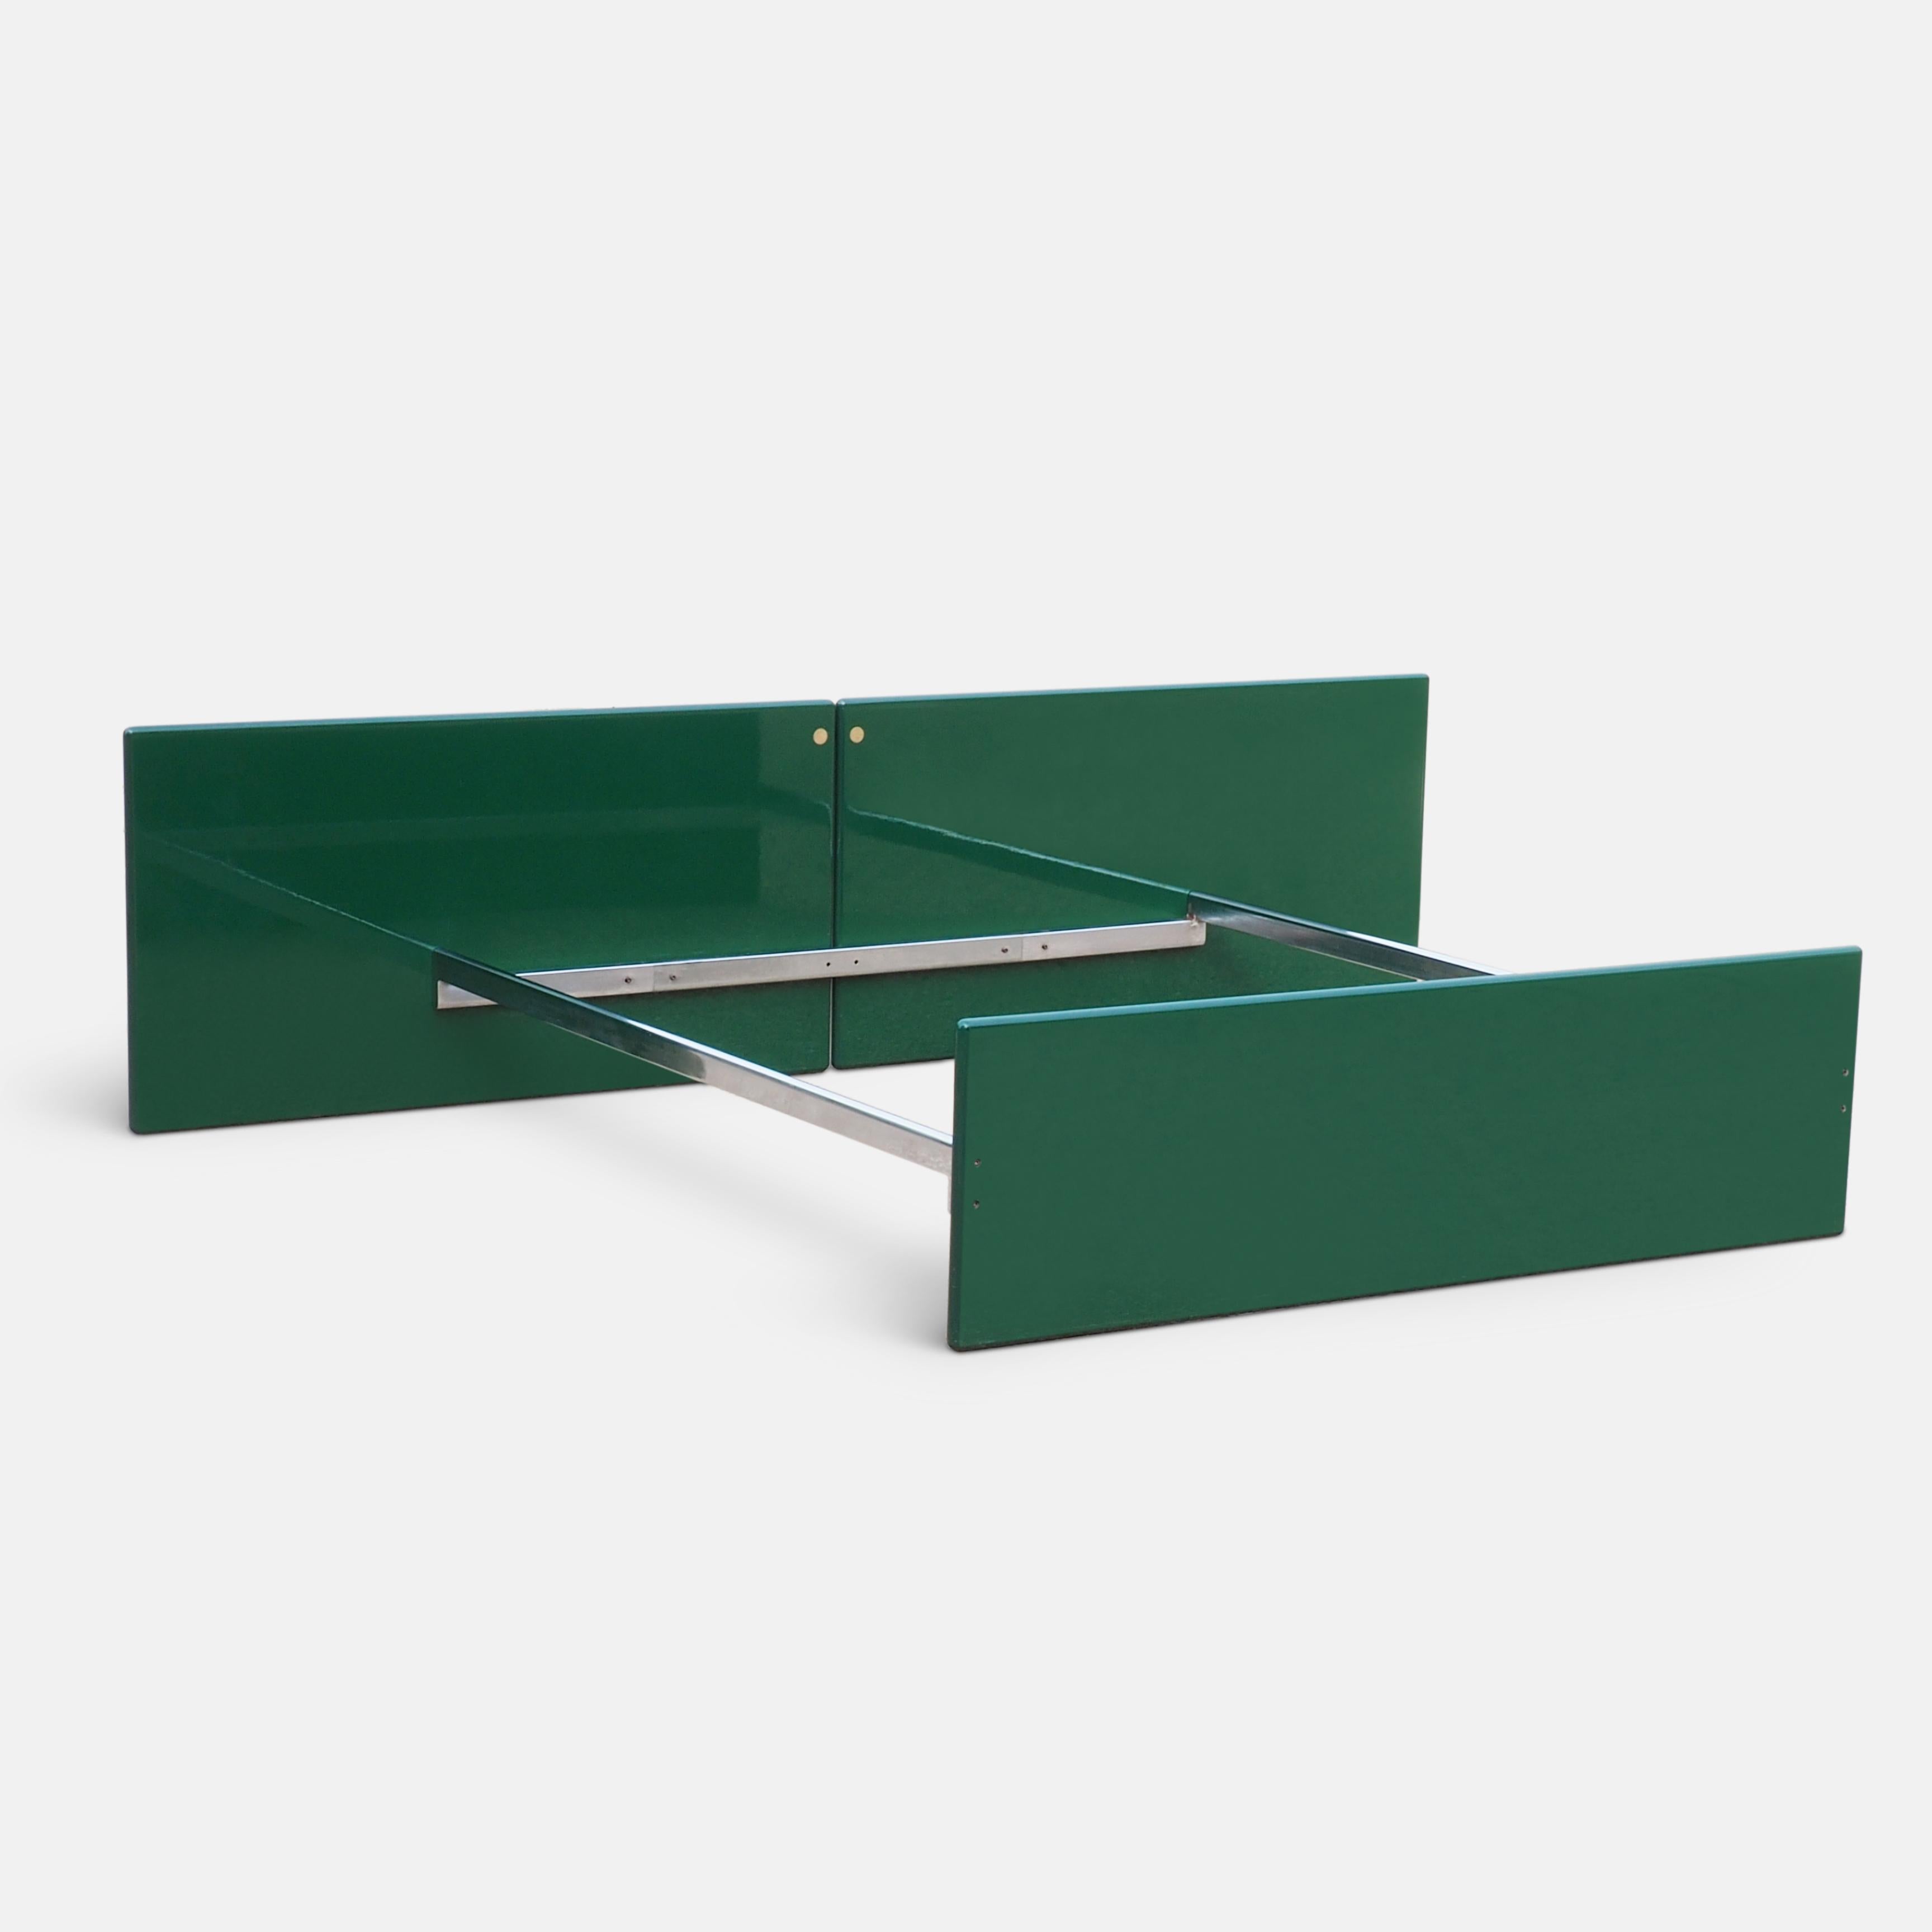 Green lacquered bed by Kazuhide Takahama for Dino Gavina's Studio Simon, Italy. Elegant bed of deep green lacquer panels and chrome metal rails finished with distinctive brass disc fittings. A sleek fusion of Japanese minimalism and Italian style.